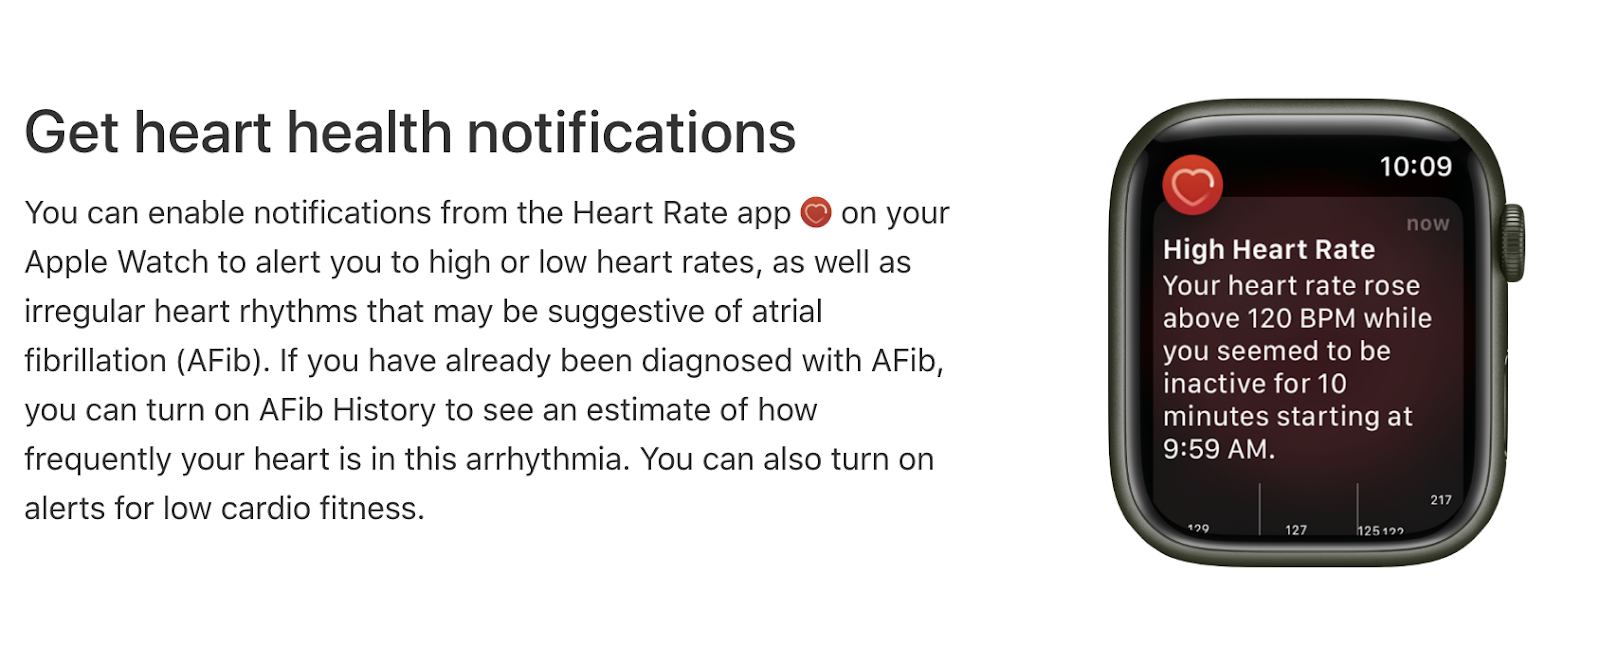 Apple watch uses different types of notification to keep users engaged.